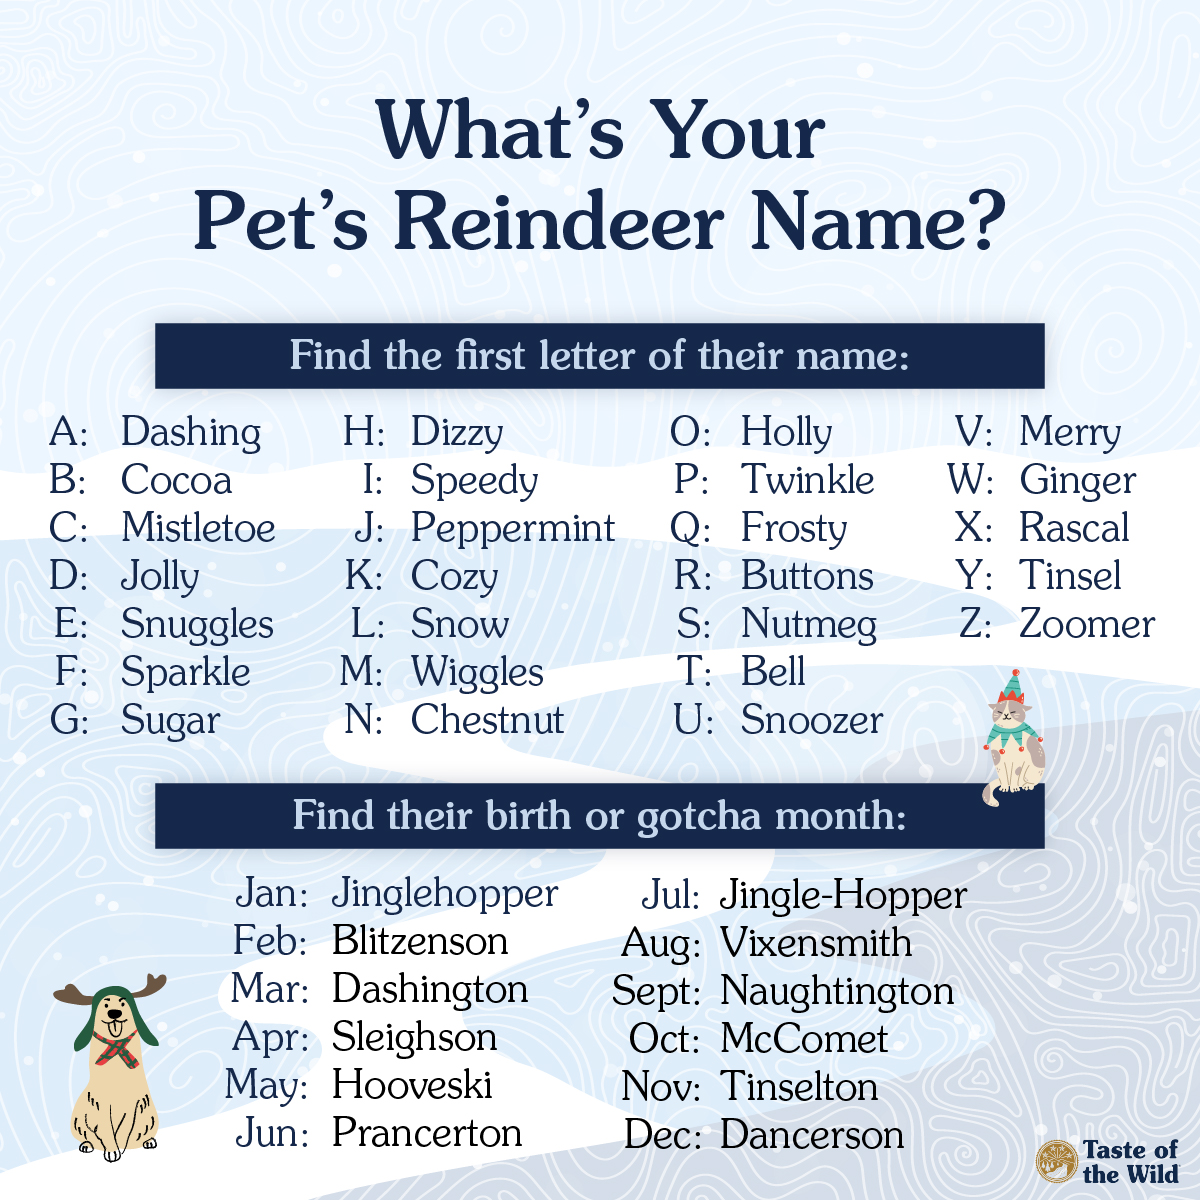 Reply with the name your pet got! 🦌 ⬇️